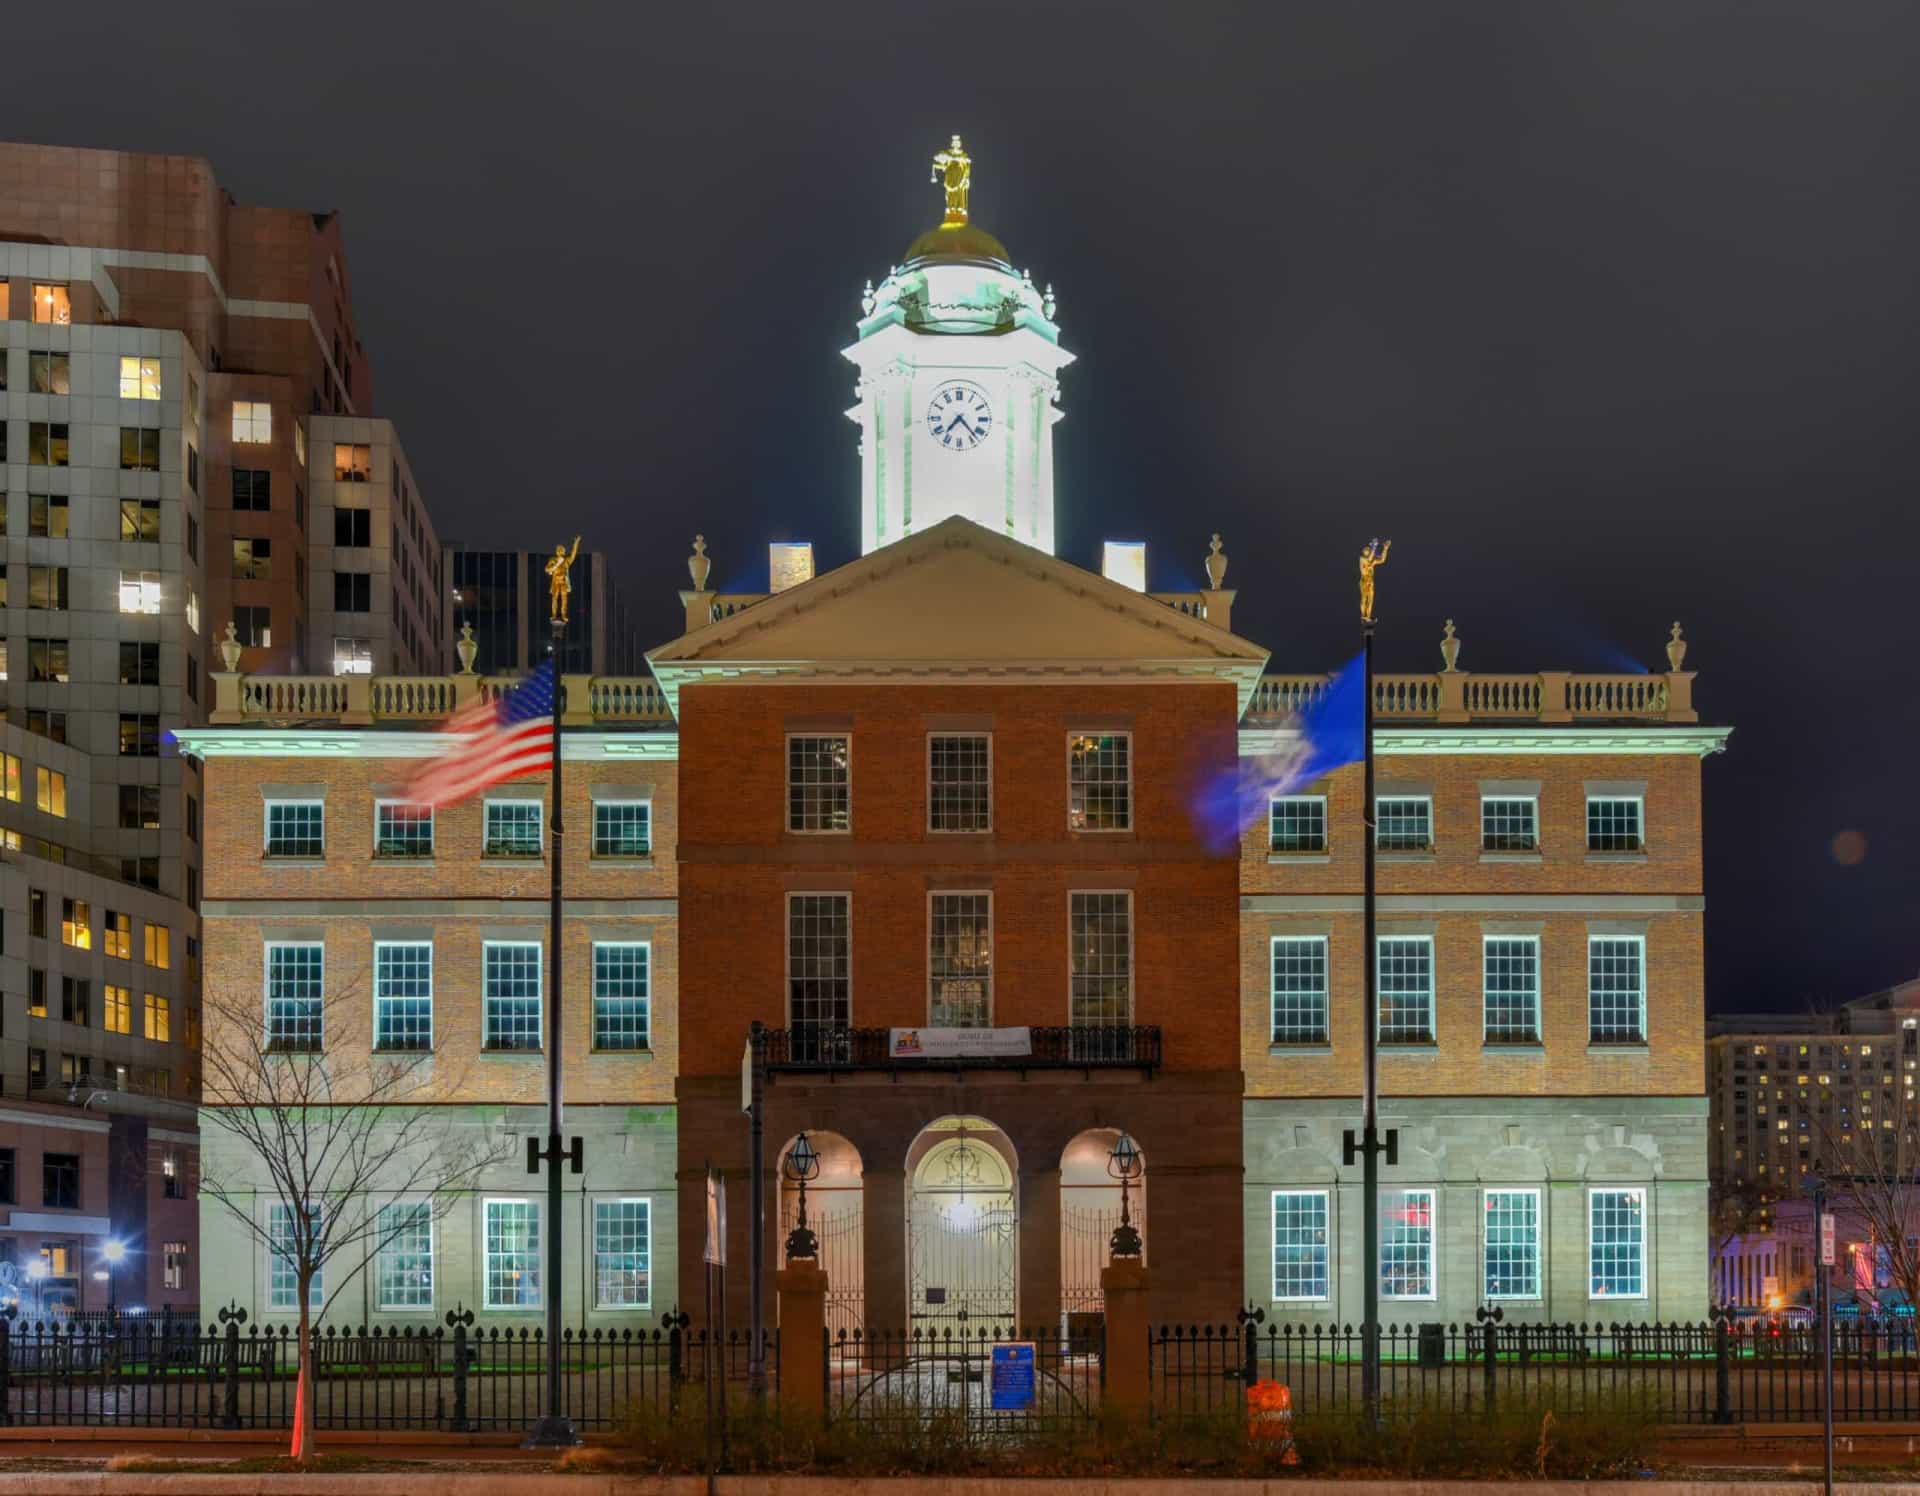 <p>It's also worth taking a look at the Old State House, completed in 1792. Combining Federal, Colonial Revival, and Victorian architectural design signatures, the building features a museum the exhibits of which focus on the history of Hartford and significant events in Connecticut's history.</p><p><a href="https://www.msn.com/en-us/community/channel/vid-7xx8mnucu55yw63we9va2gwr7uihbxwc68fxqp25x6tg4ftibpra?cvid=94631541bc0f4f89bfd59158d696ad7e">Follow us and access great exclusive content everyday</a></p>